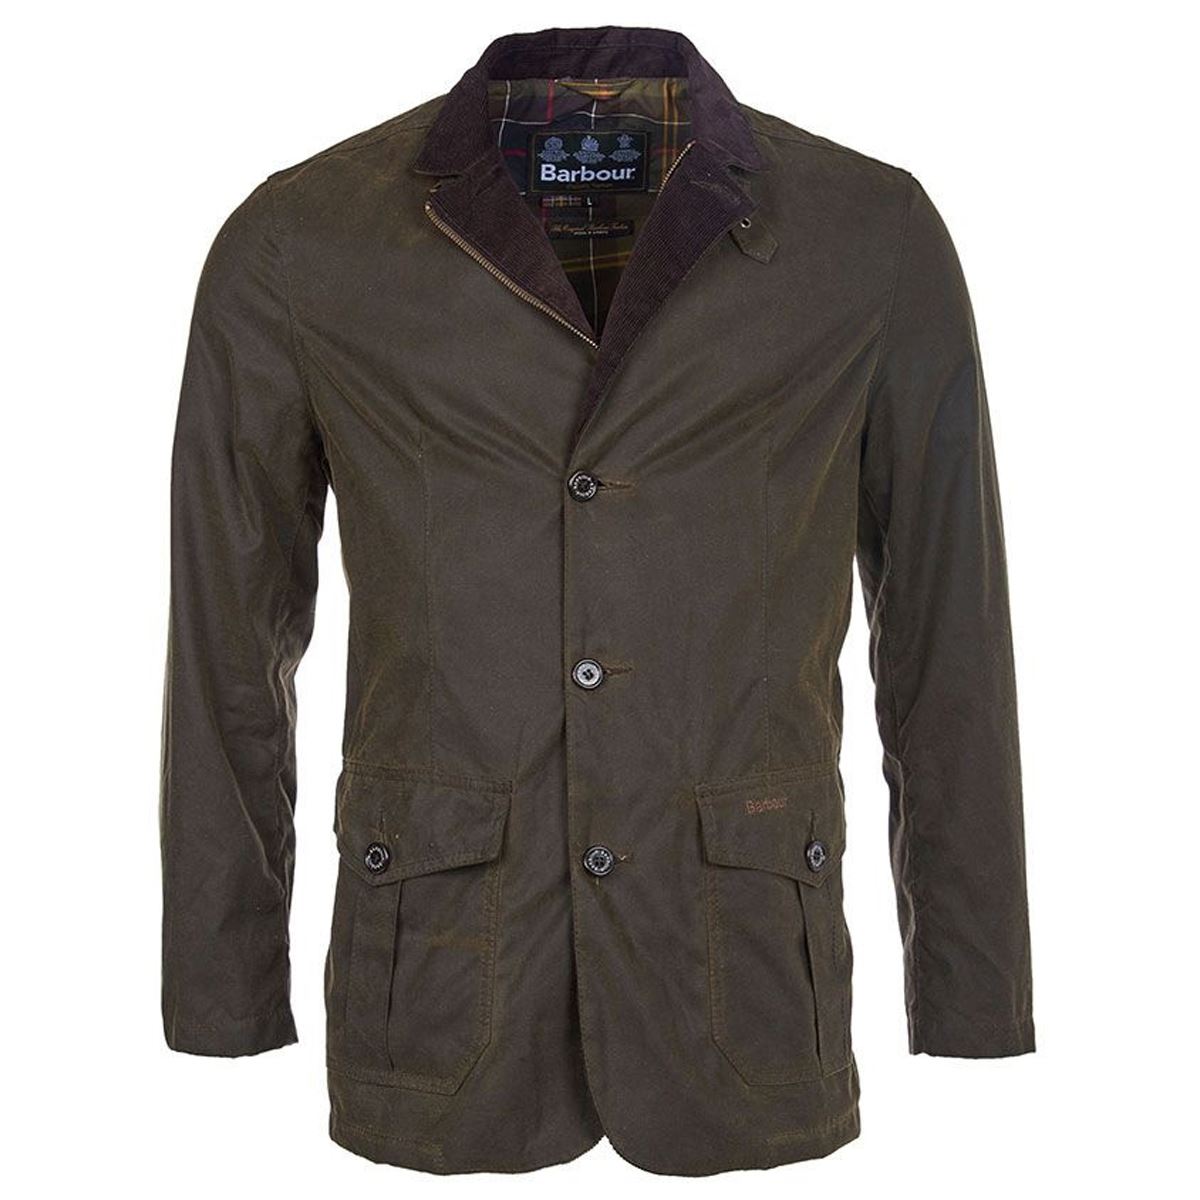 What happens if you wash a Barbour jacket?